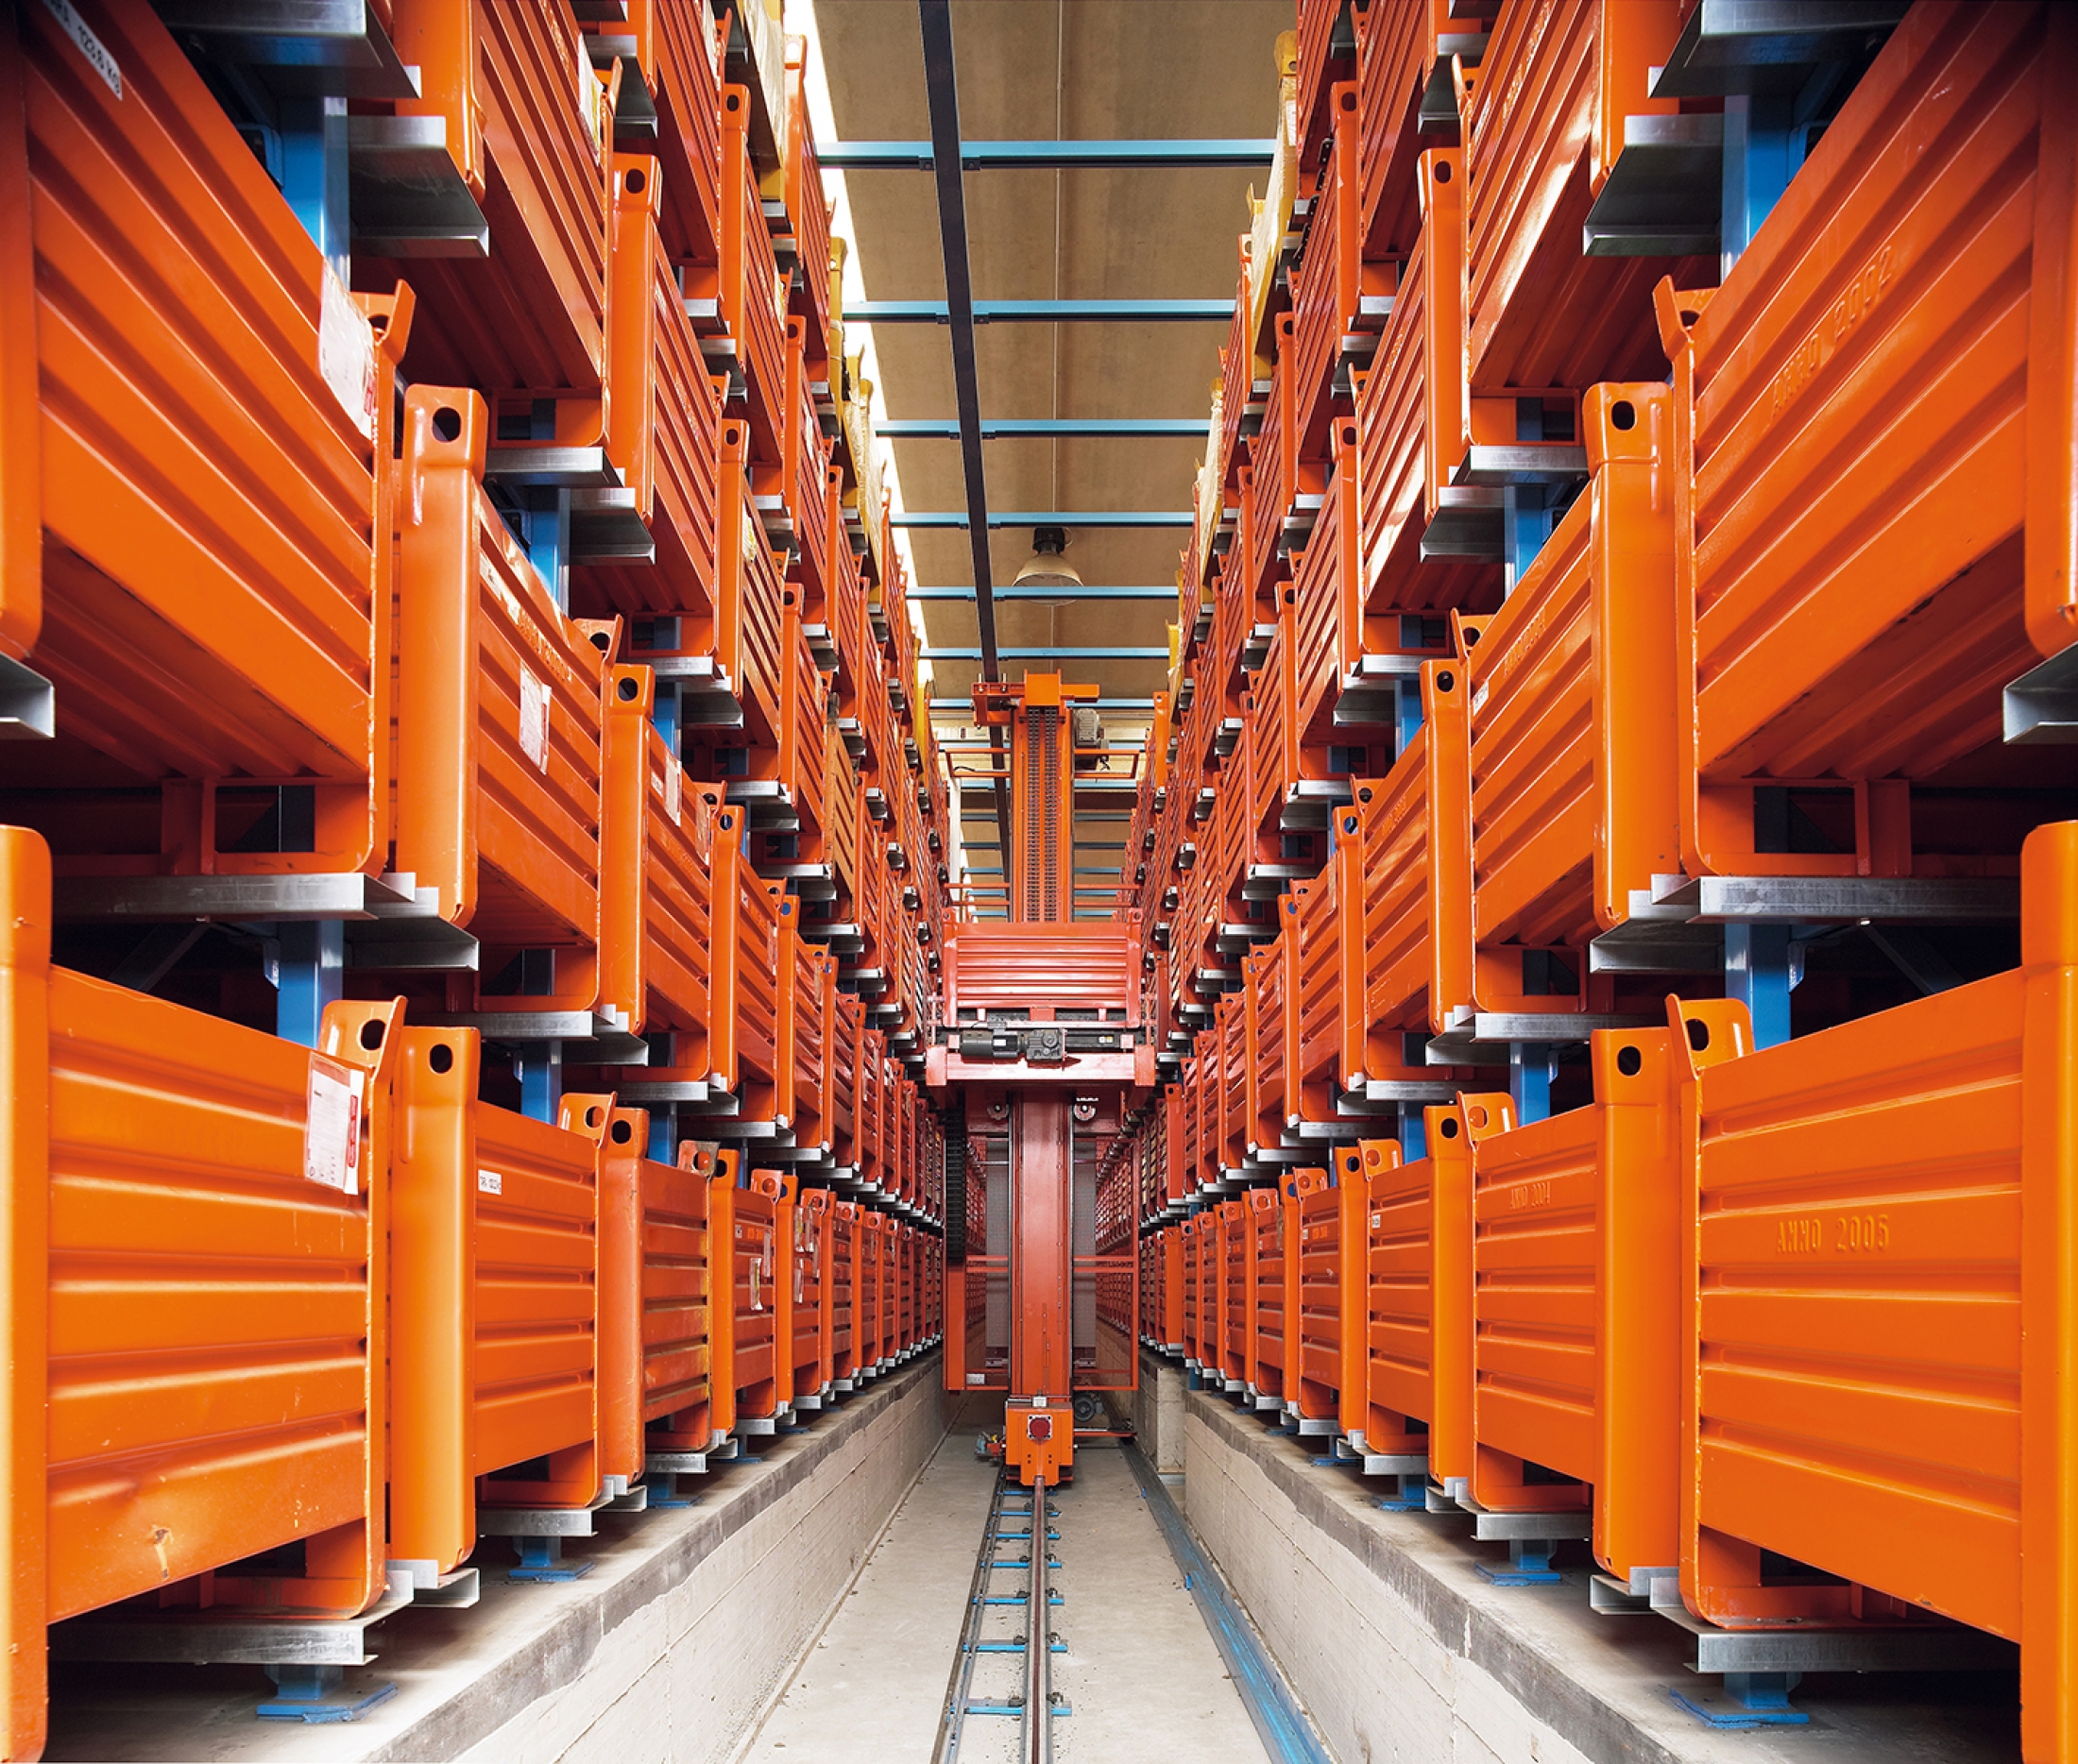 Warehouse automation can help companies remain responsive and flexible during the corona crisis.